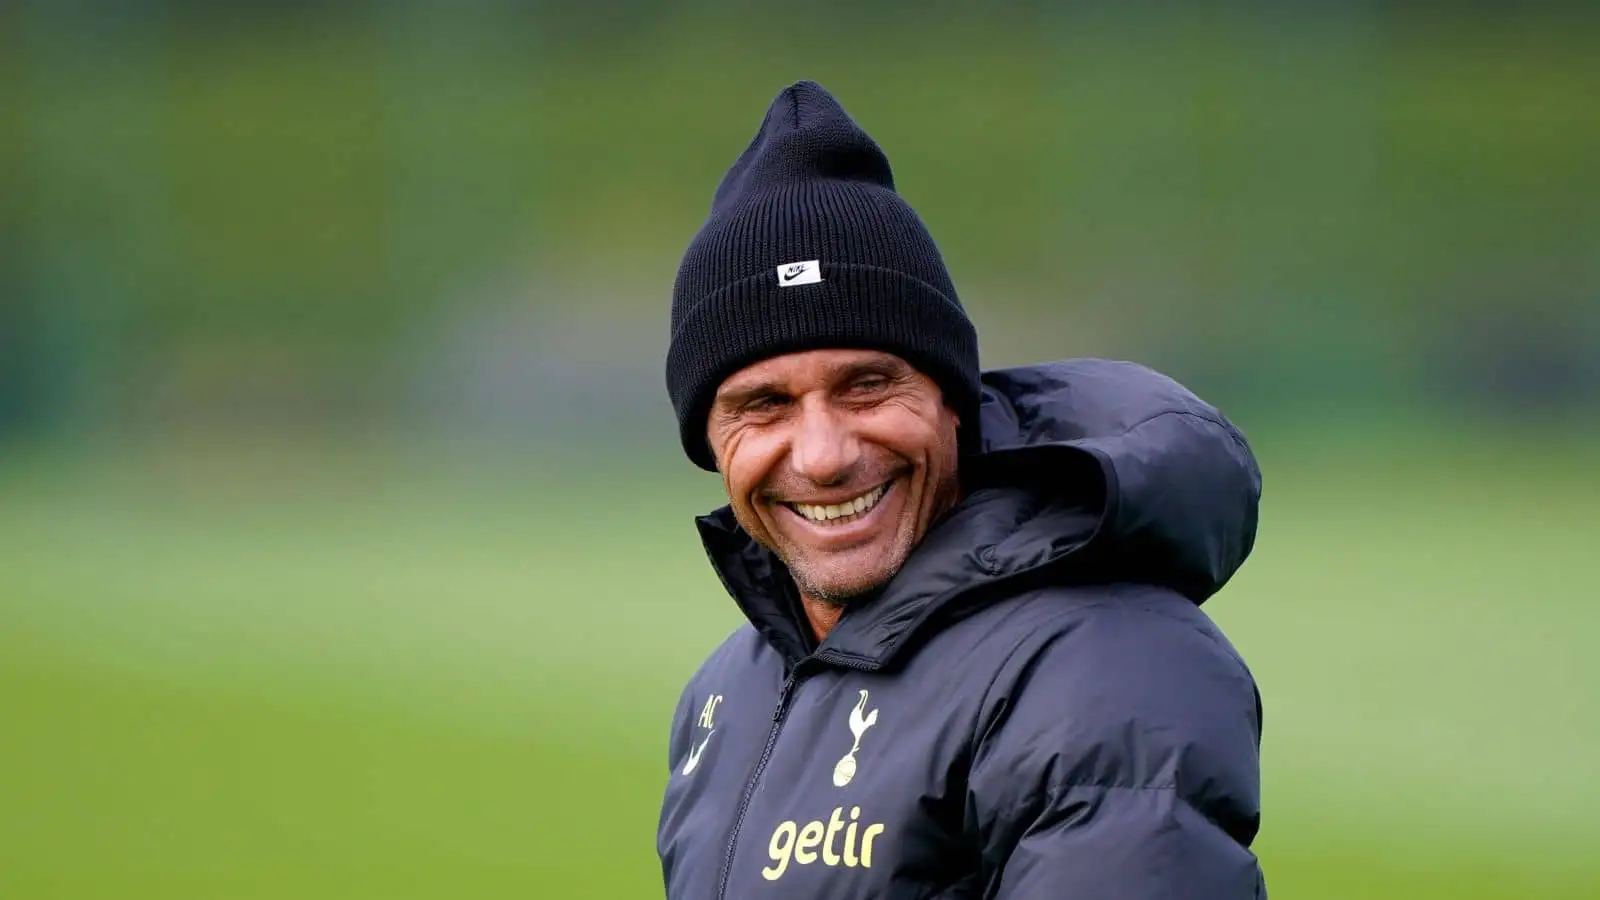 Antonio Conte to achieve ‘exciting’ next move after Tottenham exit, with boss eager to join club fighting for European glory